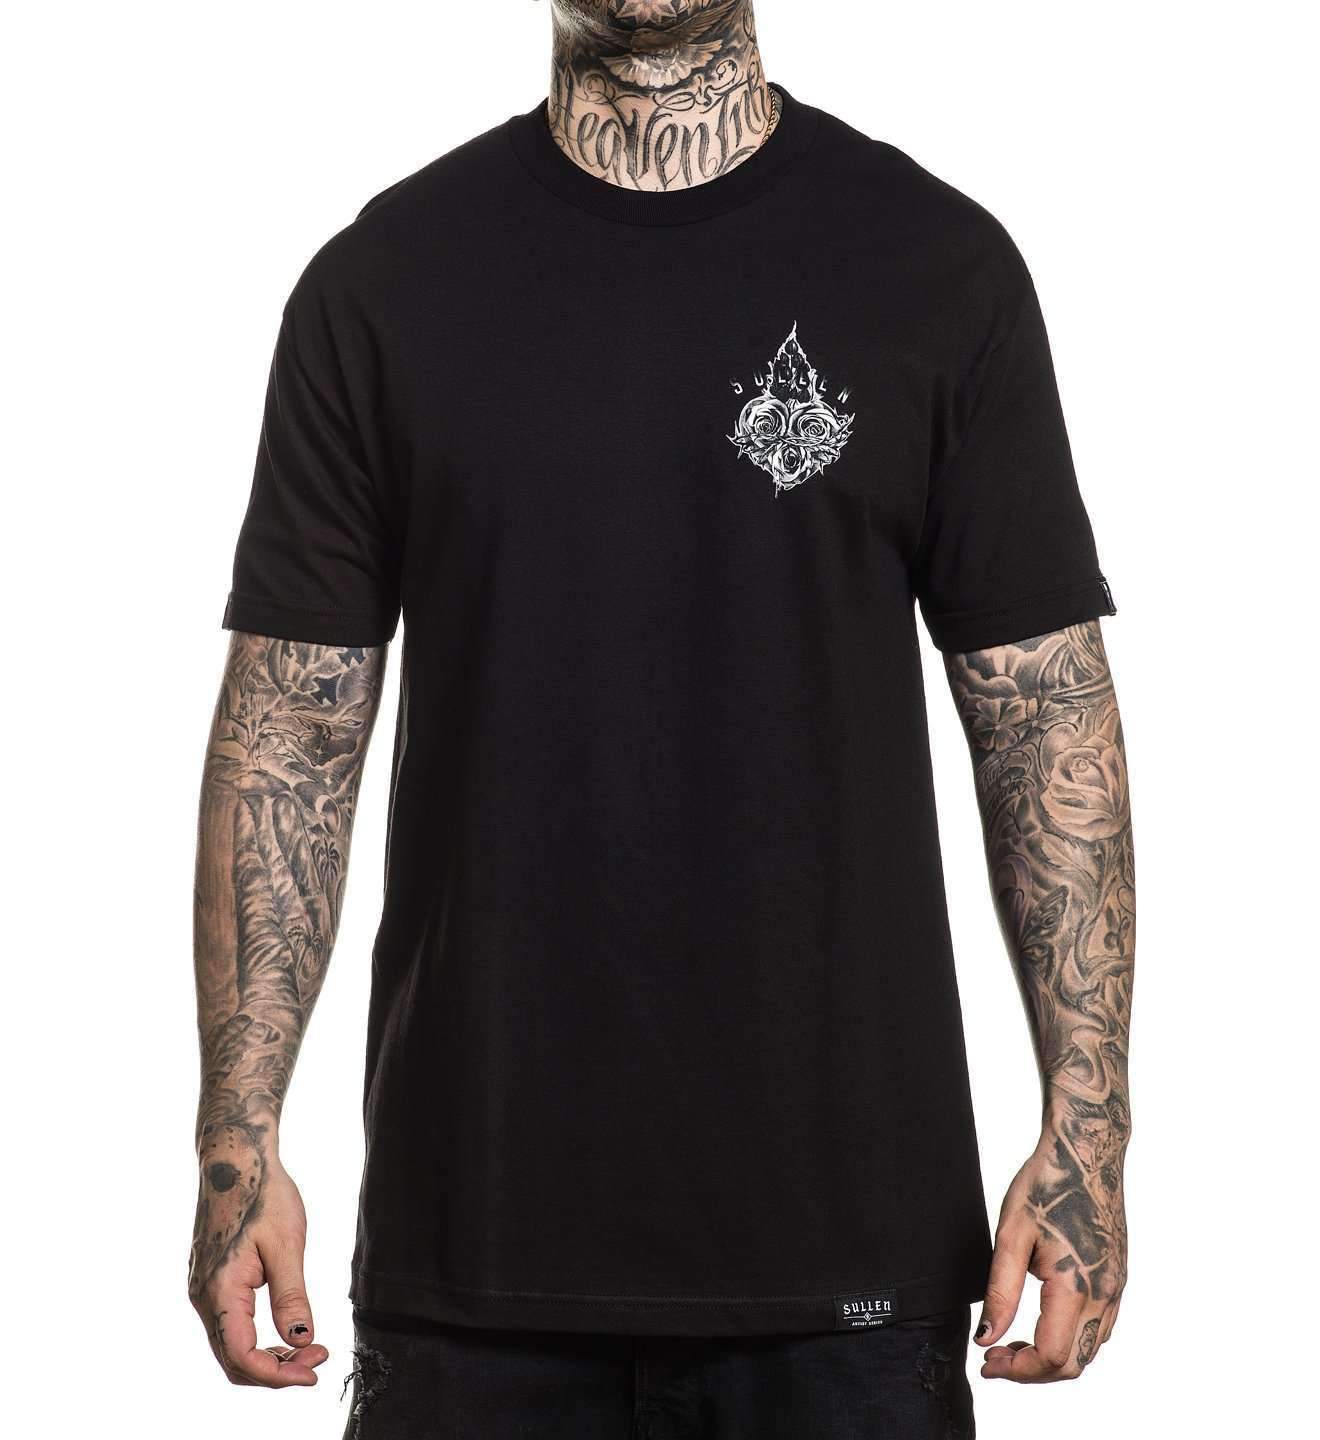 Sacred Rose T-Shirt by Sullen